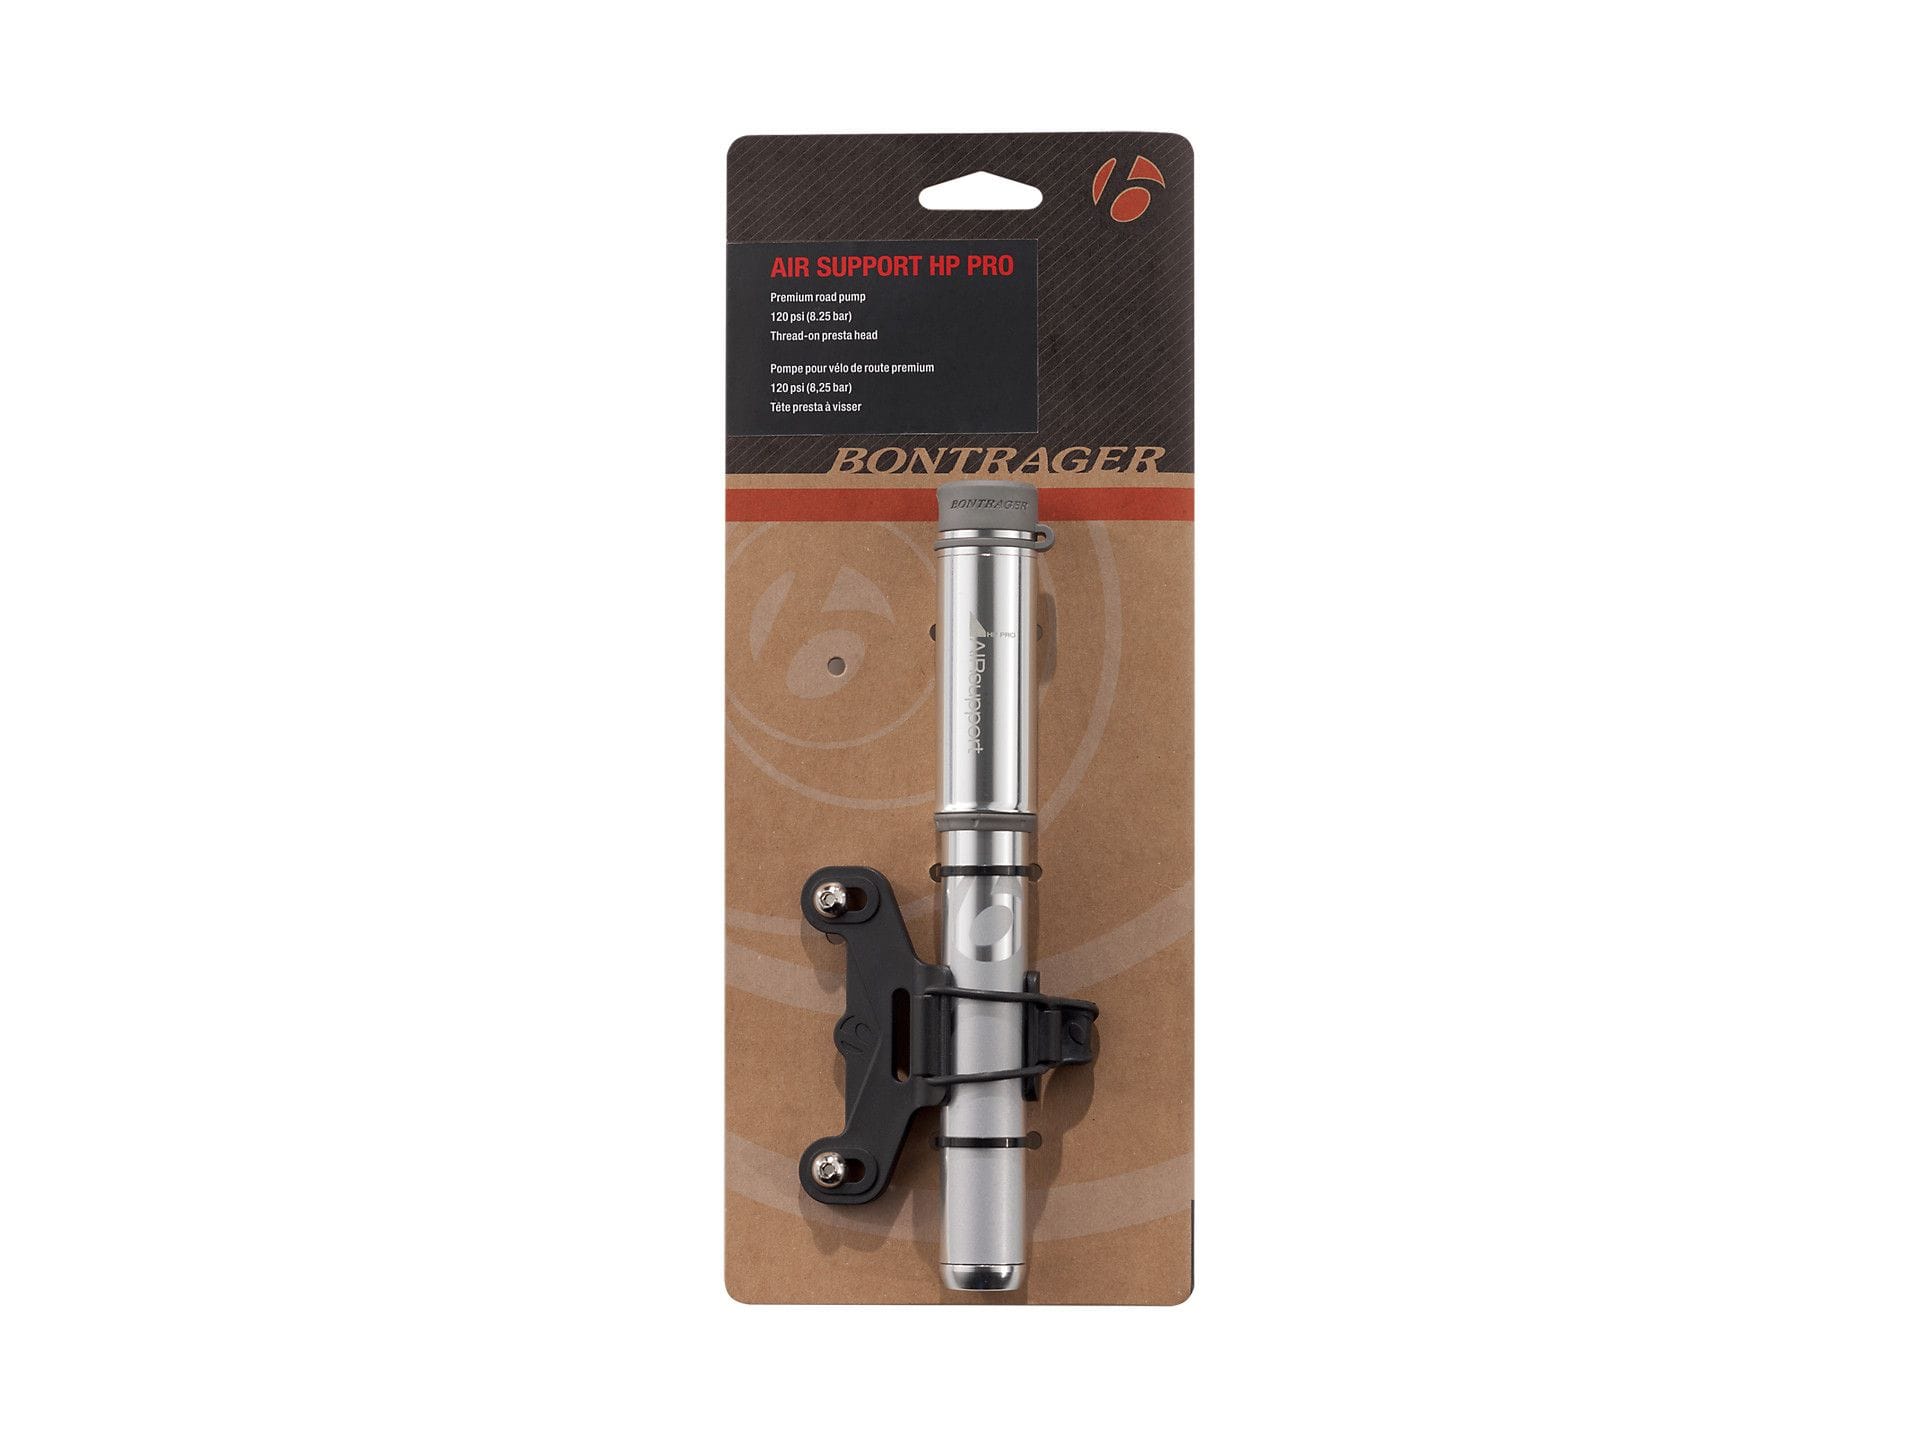 BONTRAGER AIR SUPPORT HP PRO S ROAD PUMP